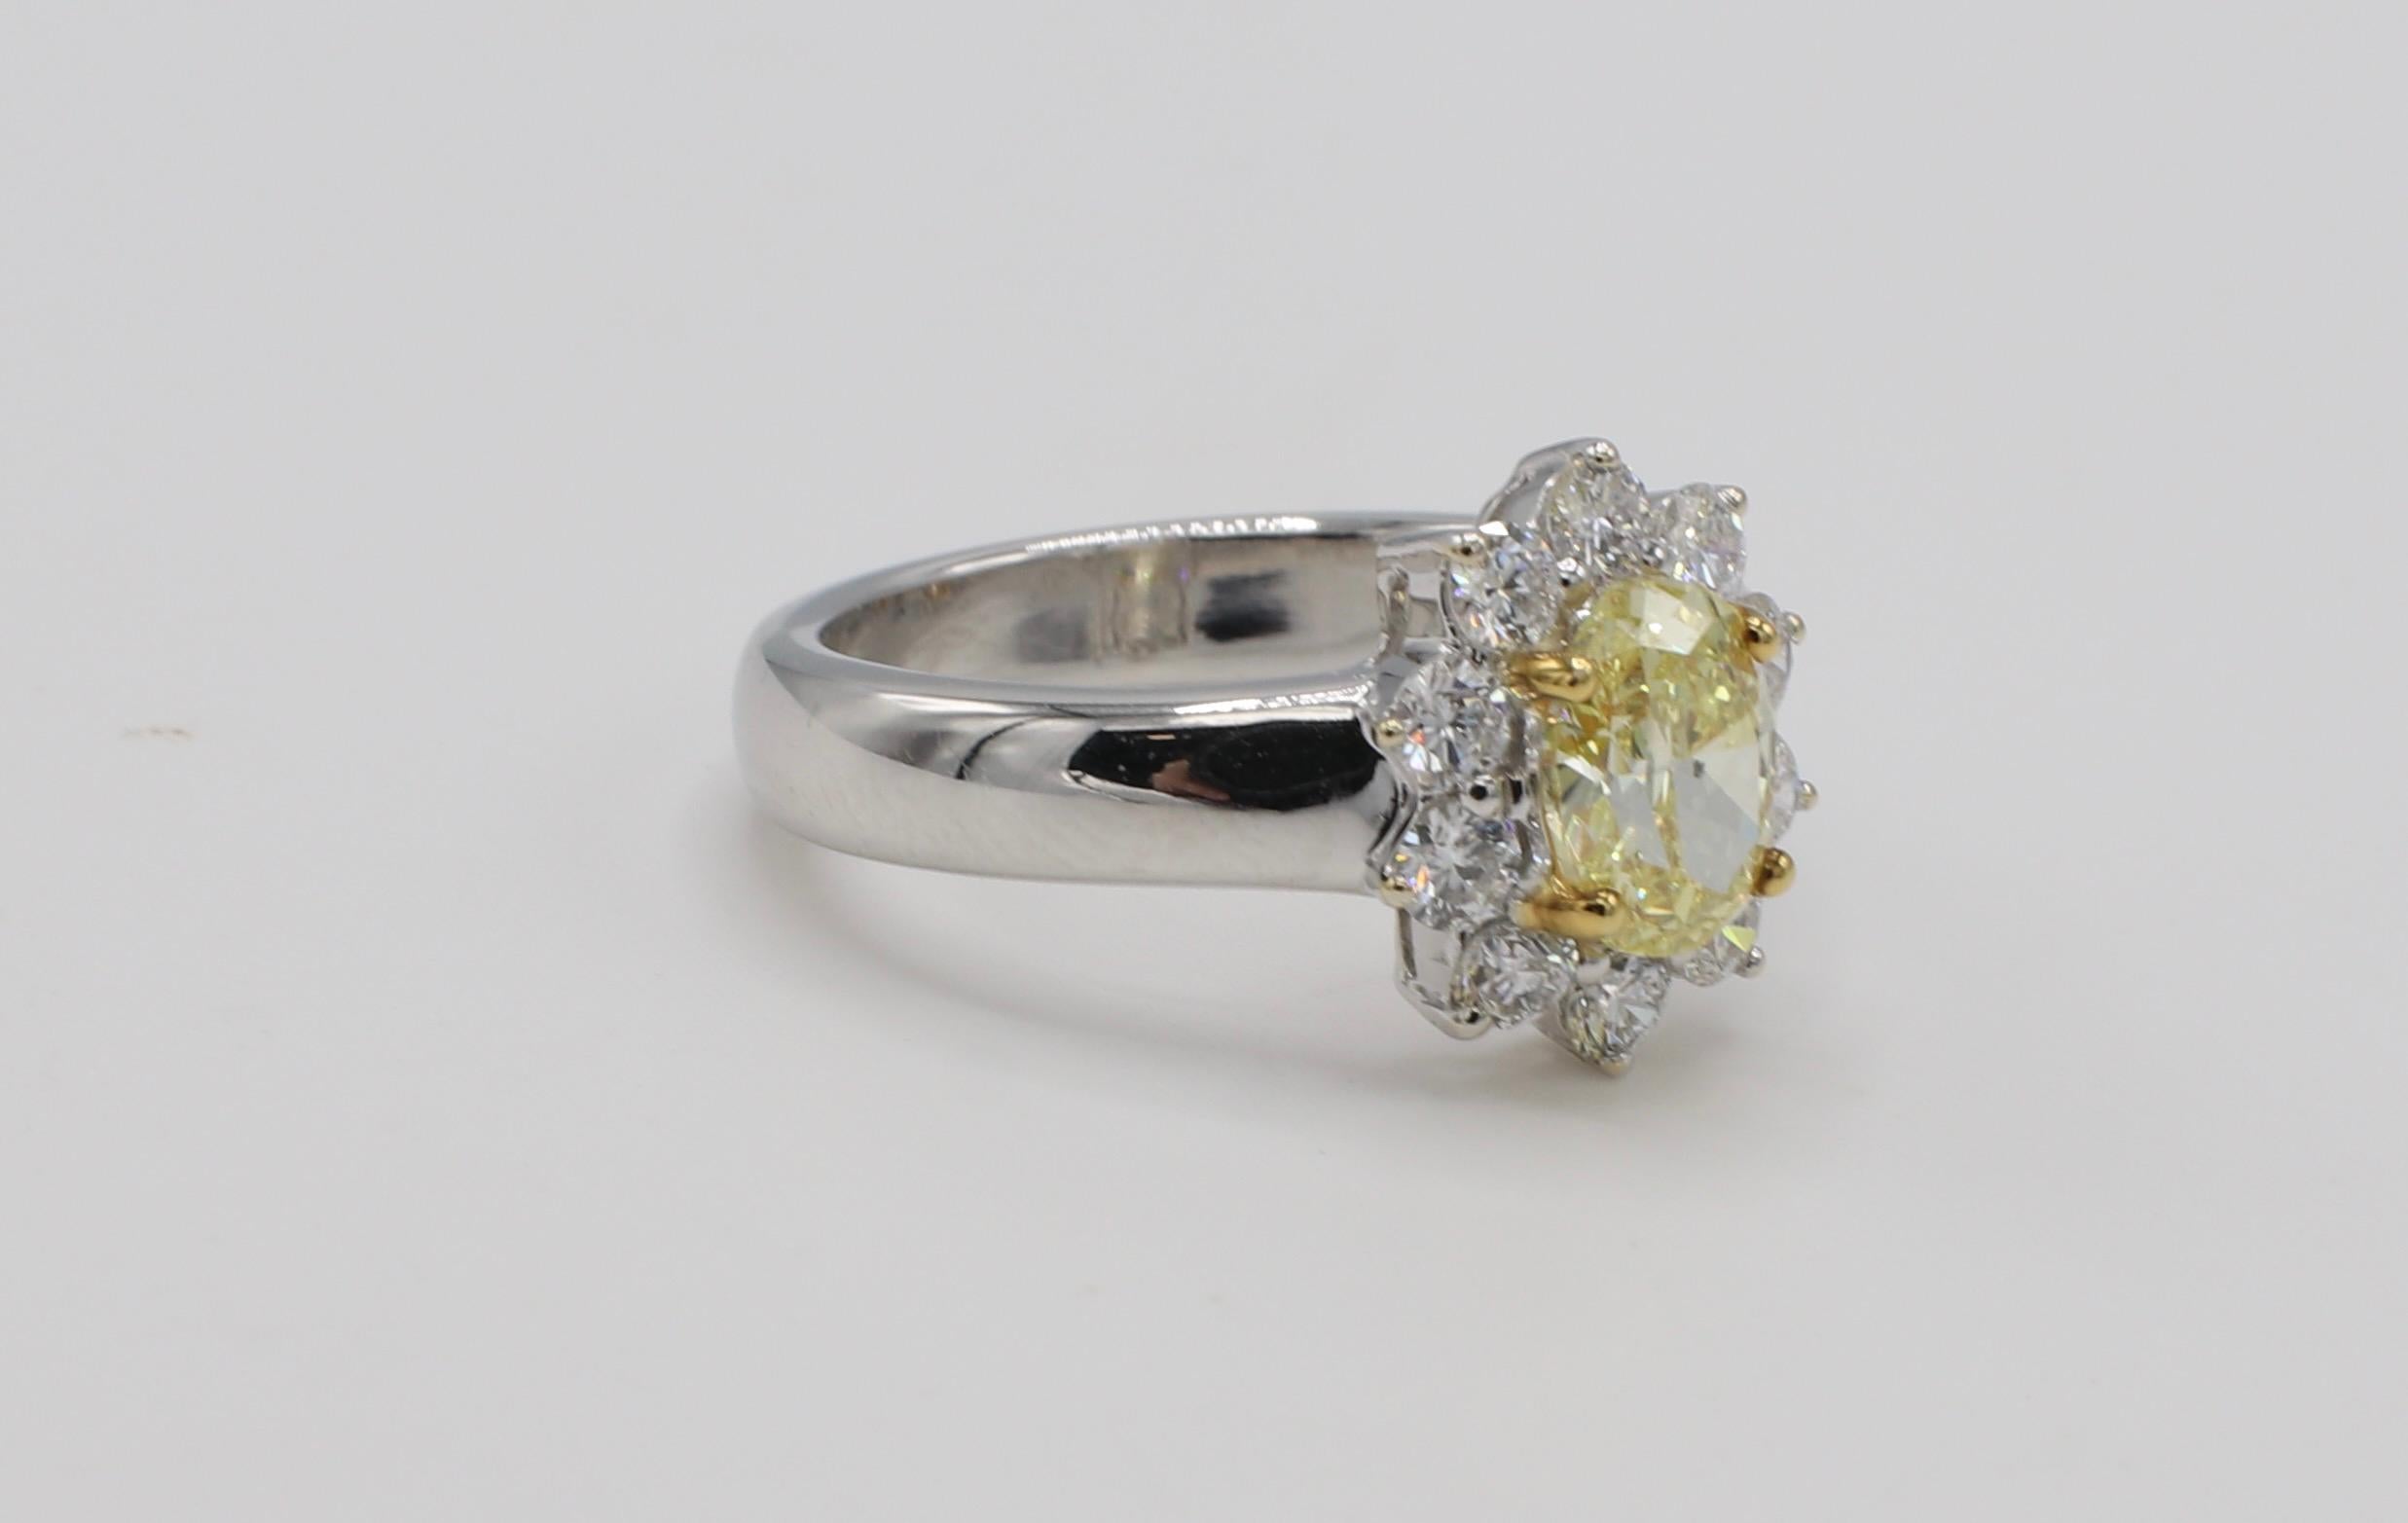 Contemporary GIA Certified 1.04 Carat Natural Fancy Intense Yellow Oval Diamond Ring